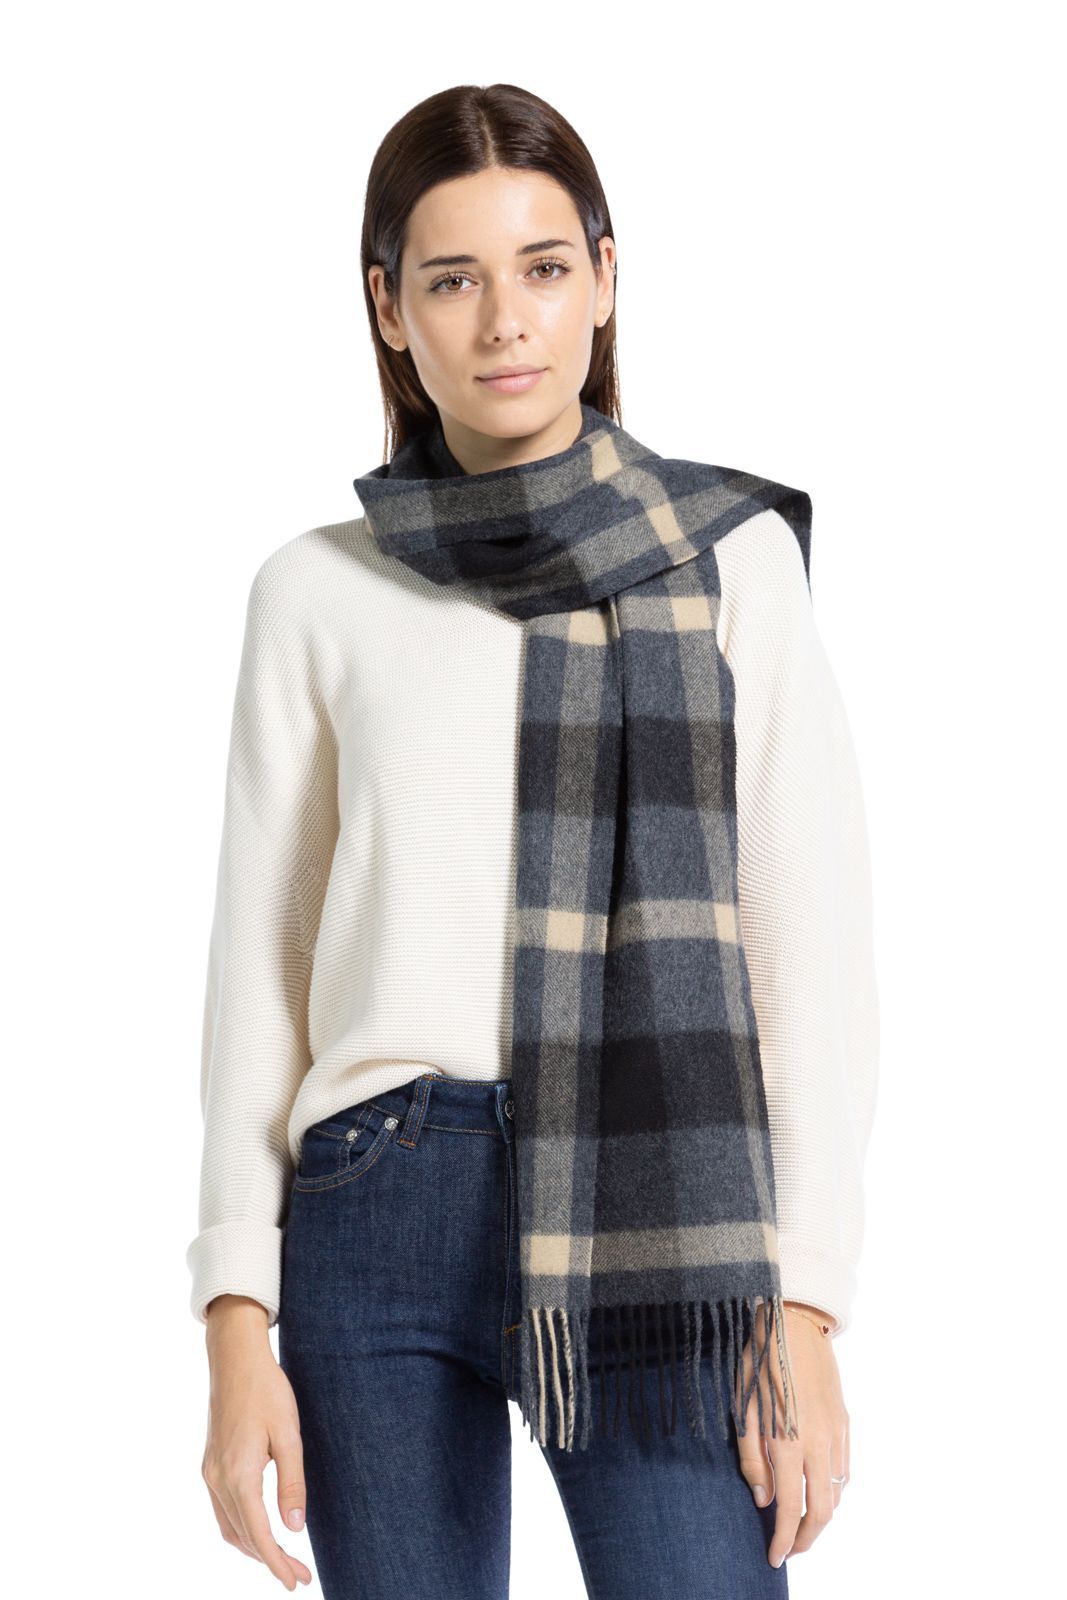 Women's Classic 100% Pure Cashmere Scarf Womens>Accessories>Scarf Fishers Finery Gray Camel Plaid One Size 